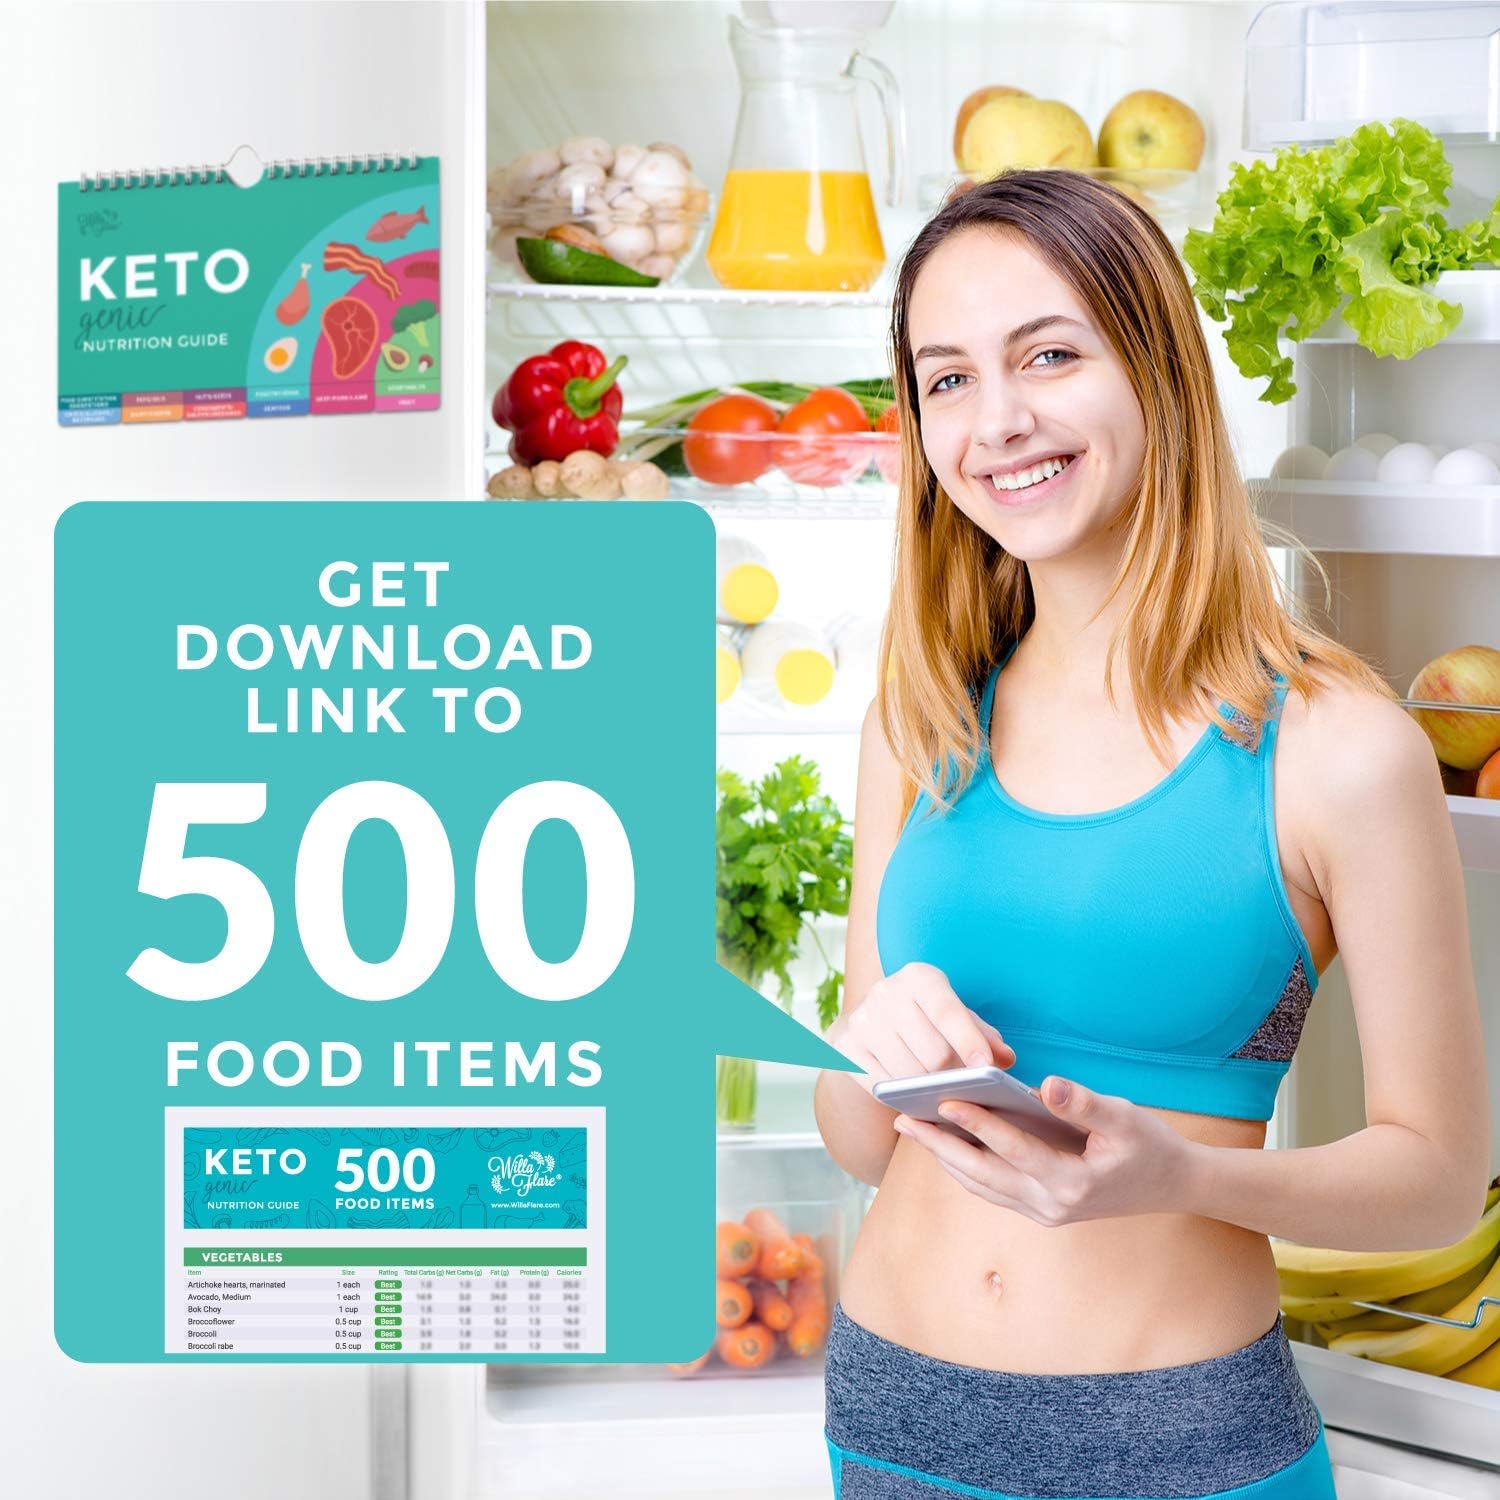 Keto Cheat Sheet Magnets - Easy Reference for 192 Keto Snacks and Foods! Correct Ketogenic Measurements for Your Keto Cookbook - Easy Keto Diet Fridge Guide Plus Extra List of 500 Foods